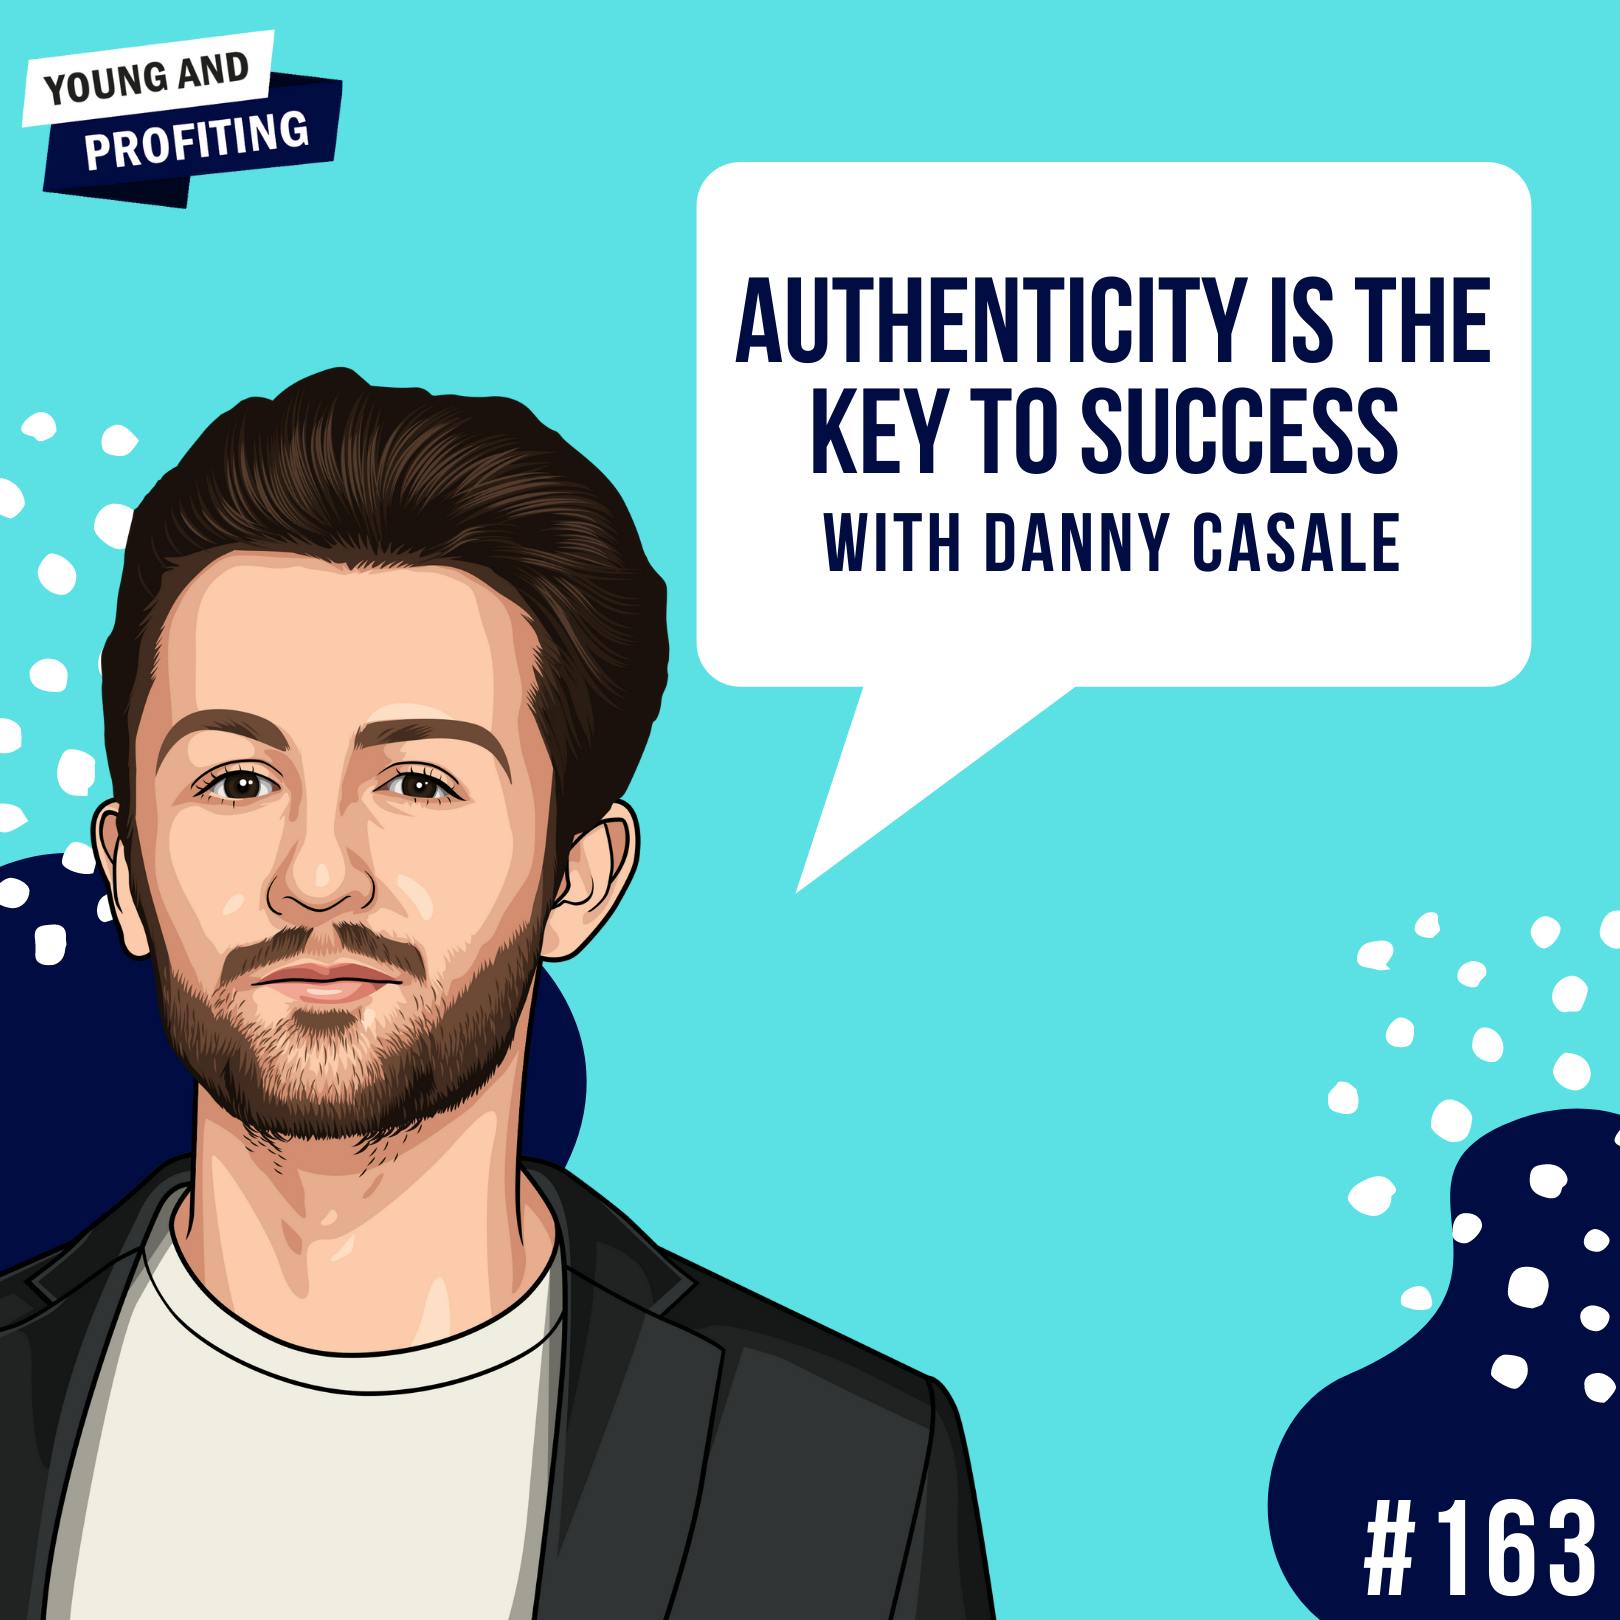 Danny Casale: Authenticity is the Key to Success | E163 by Hala Taha | YAP Media Network